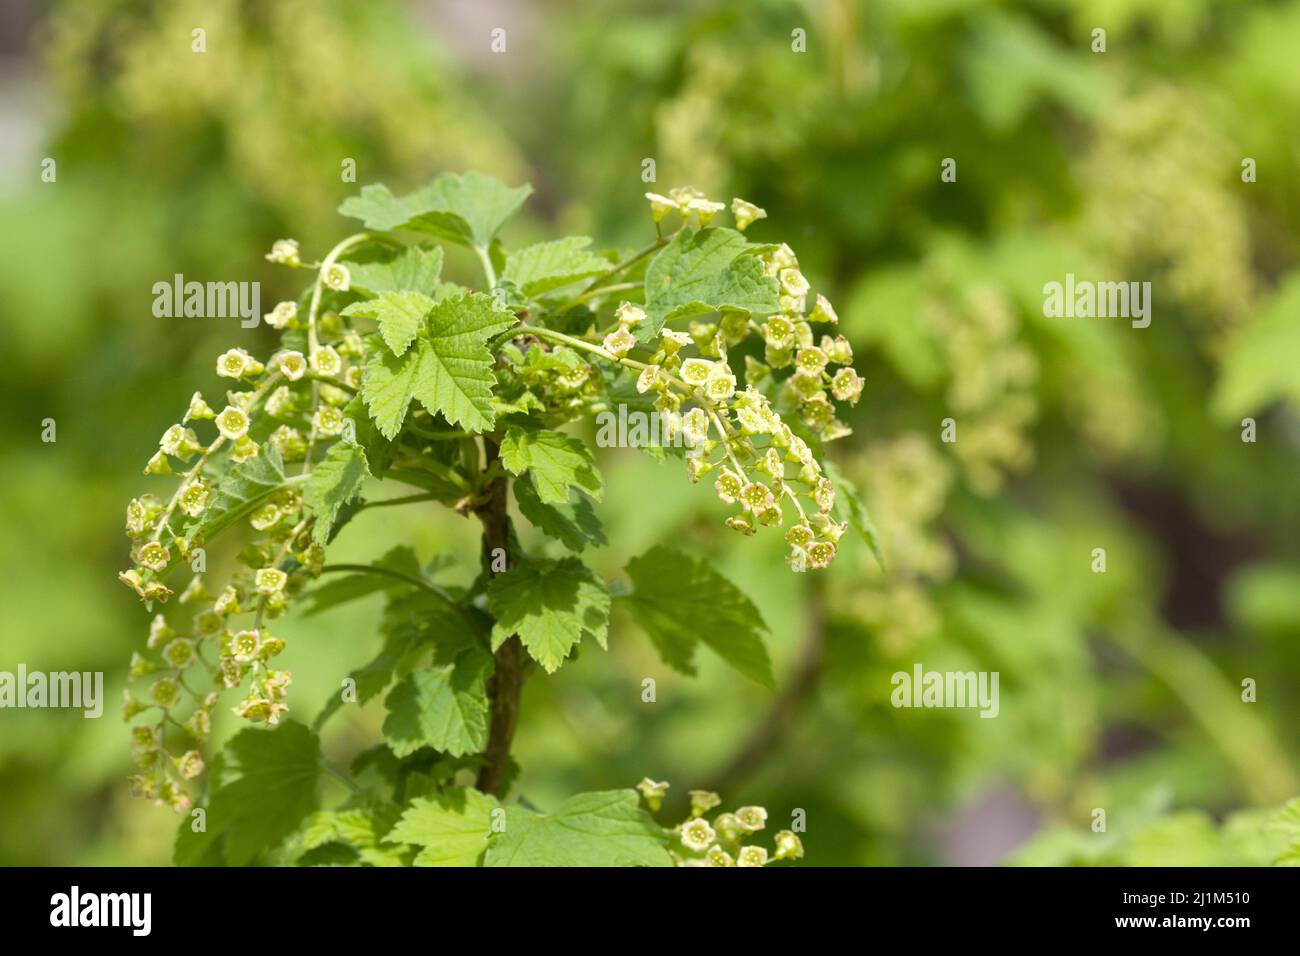 Fruitgrowing. Blooming currant. Bright green young foliage of berry bushes Stock Photo